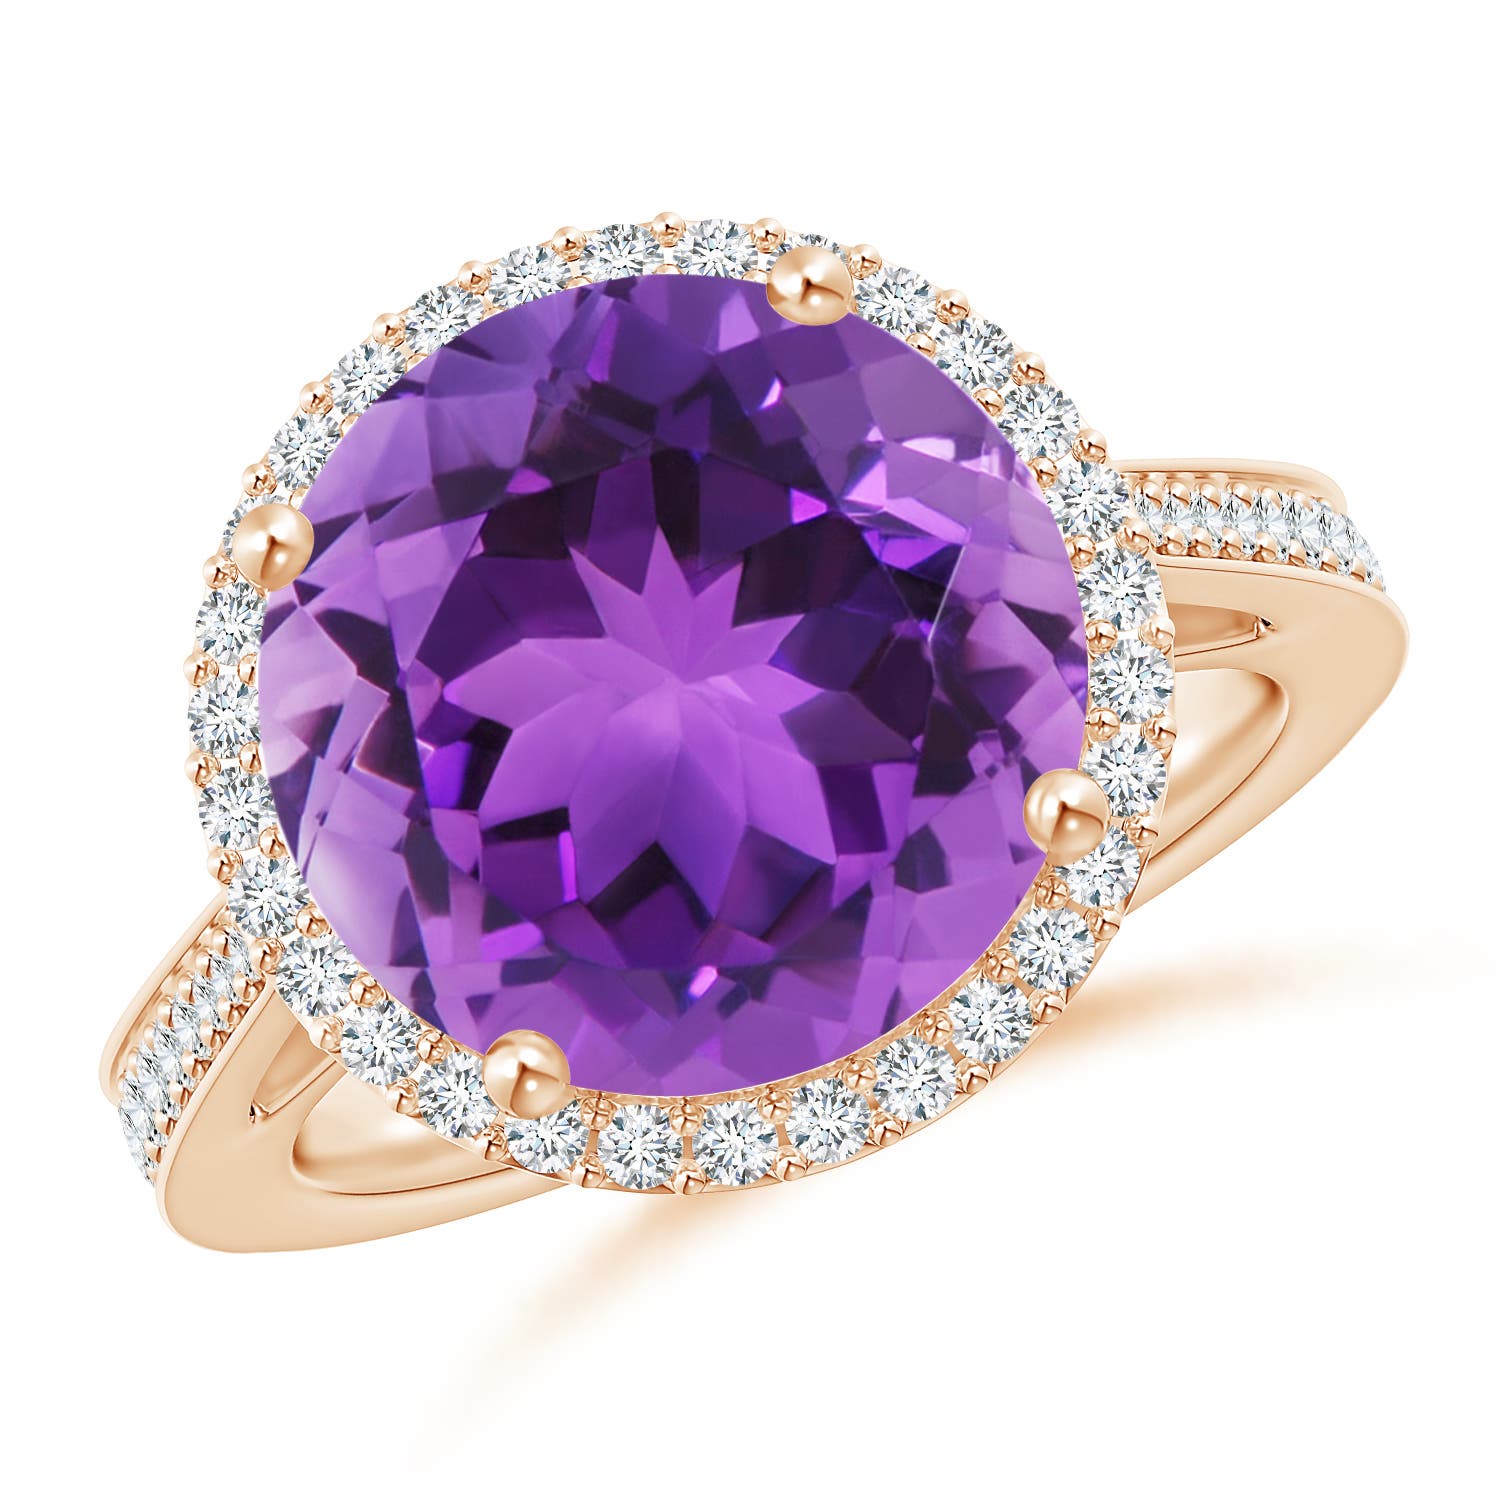 AAA - Amethyst / 5.94 CT / 14 KT Rose Gold